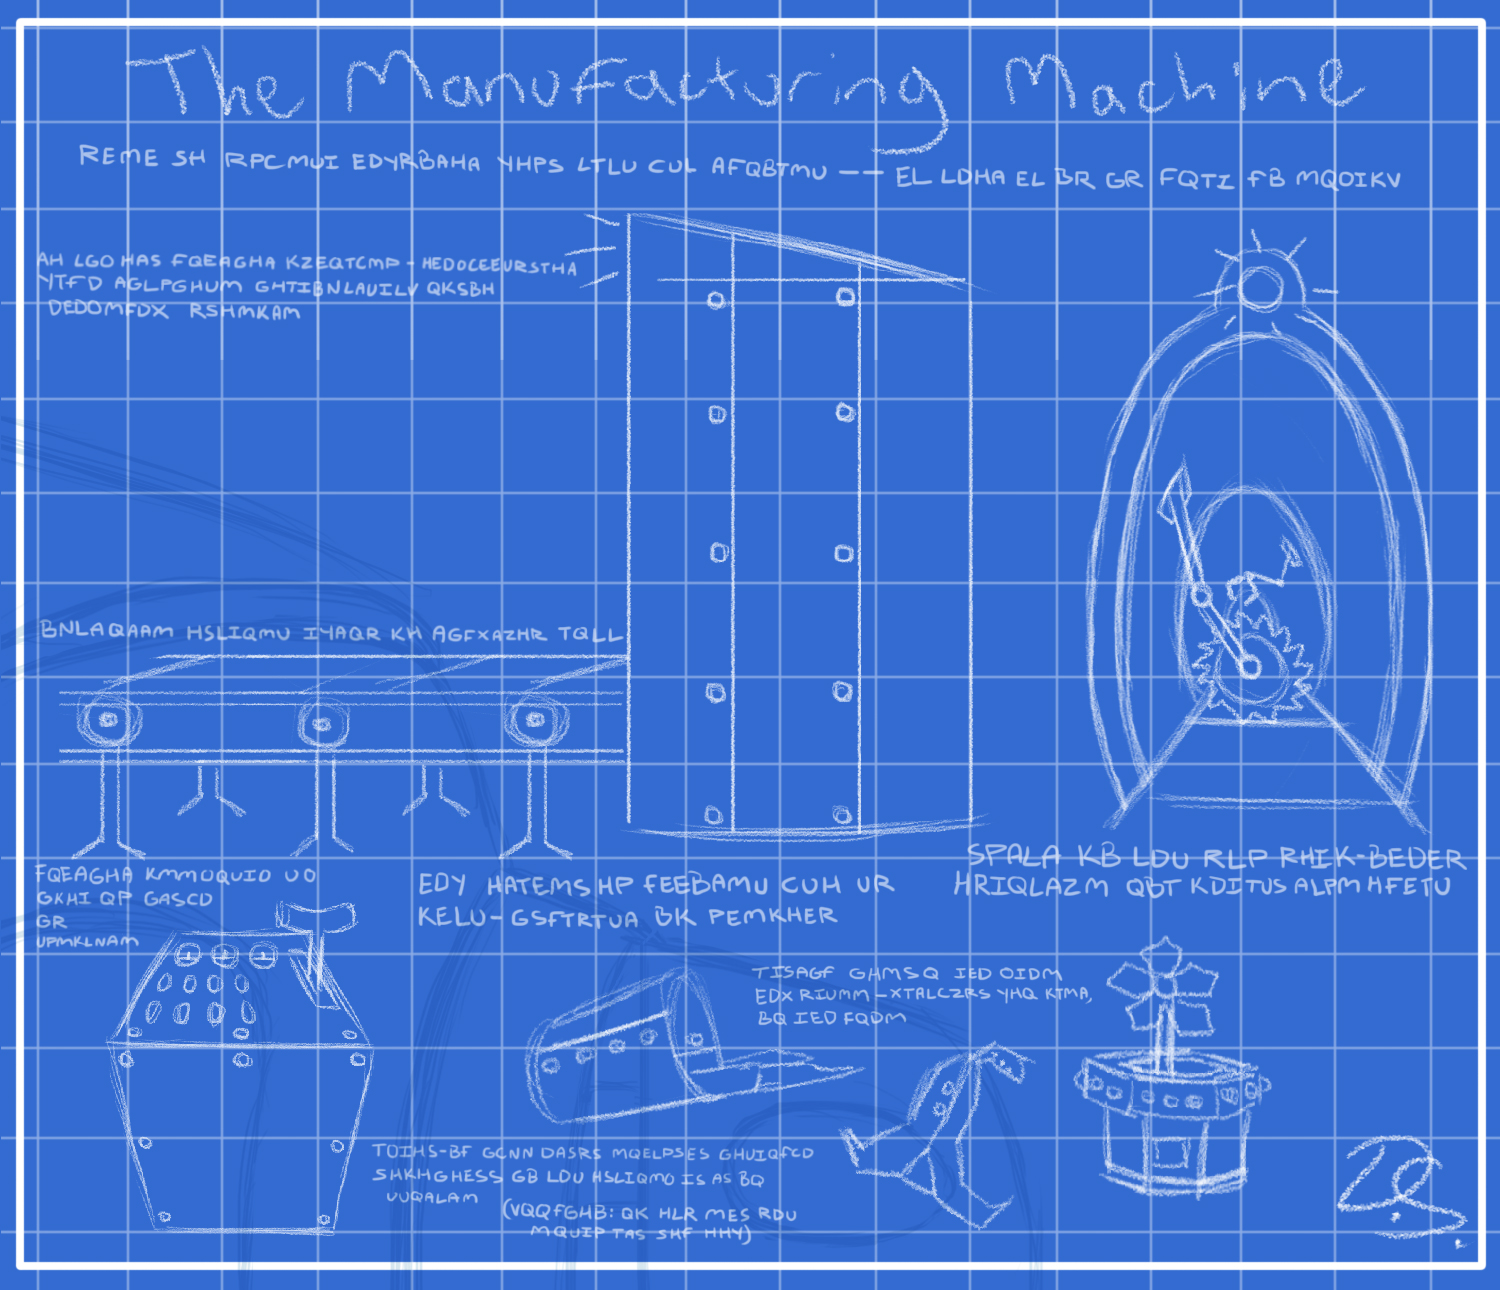 Doctor Surlee's encrypted The Manufacturing Machine blueprint.